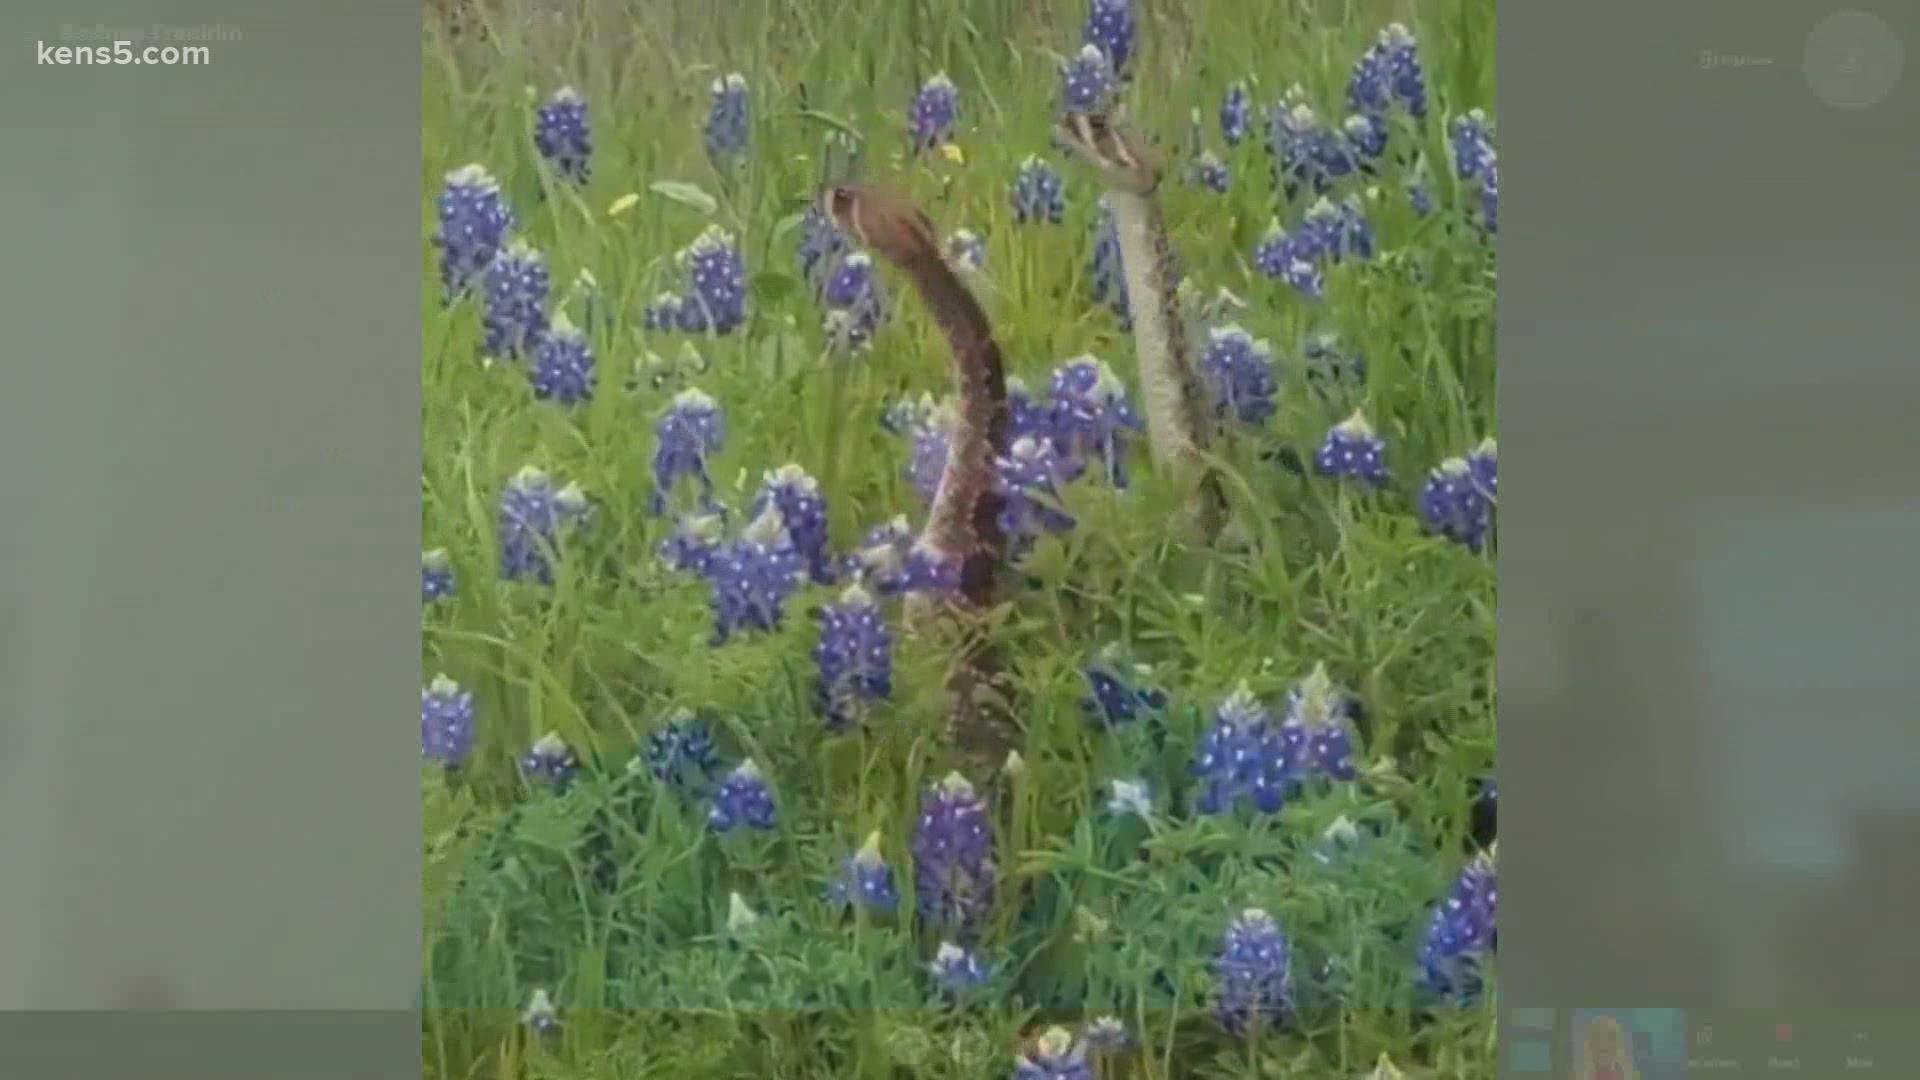 According to the Texas Parks and Wildlife Department, there is one thing needed to make it more likely to see a great showing of wildflowers this spring: more rain.